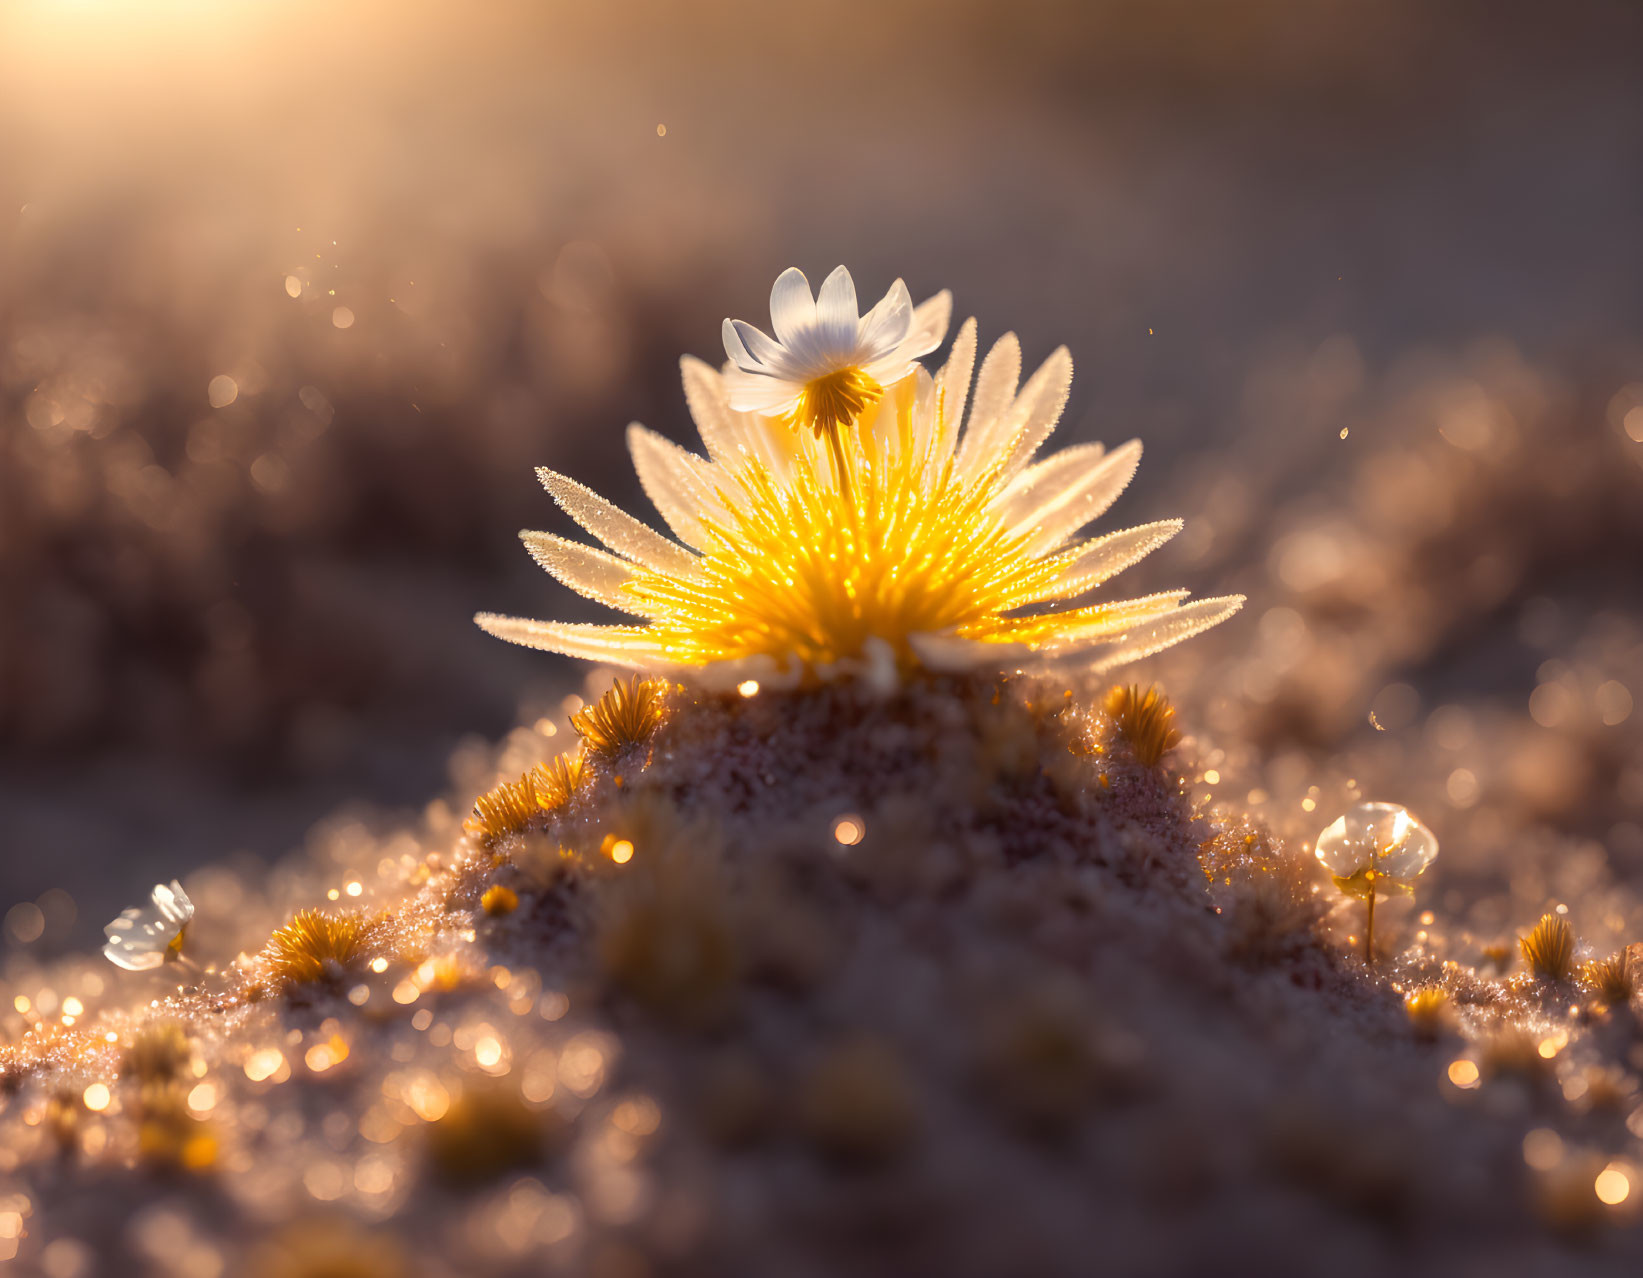 Yellow Flower with Dew in Golden Sunlight and Buds on Soft Background